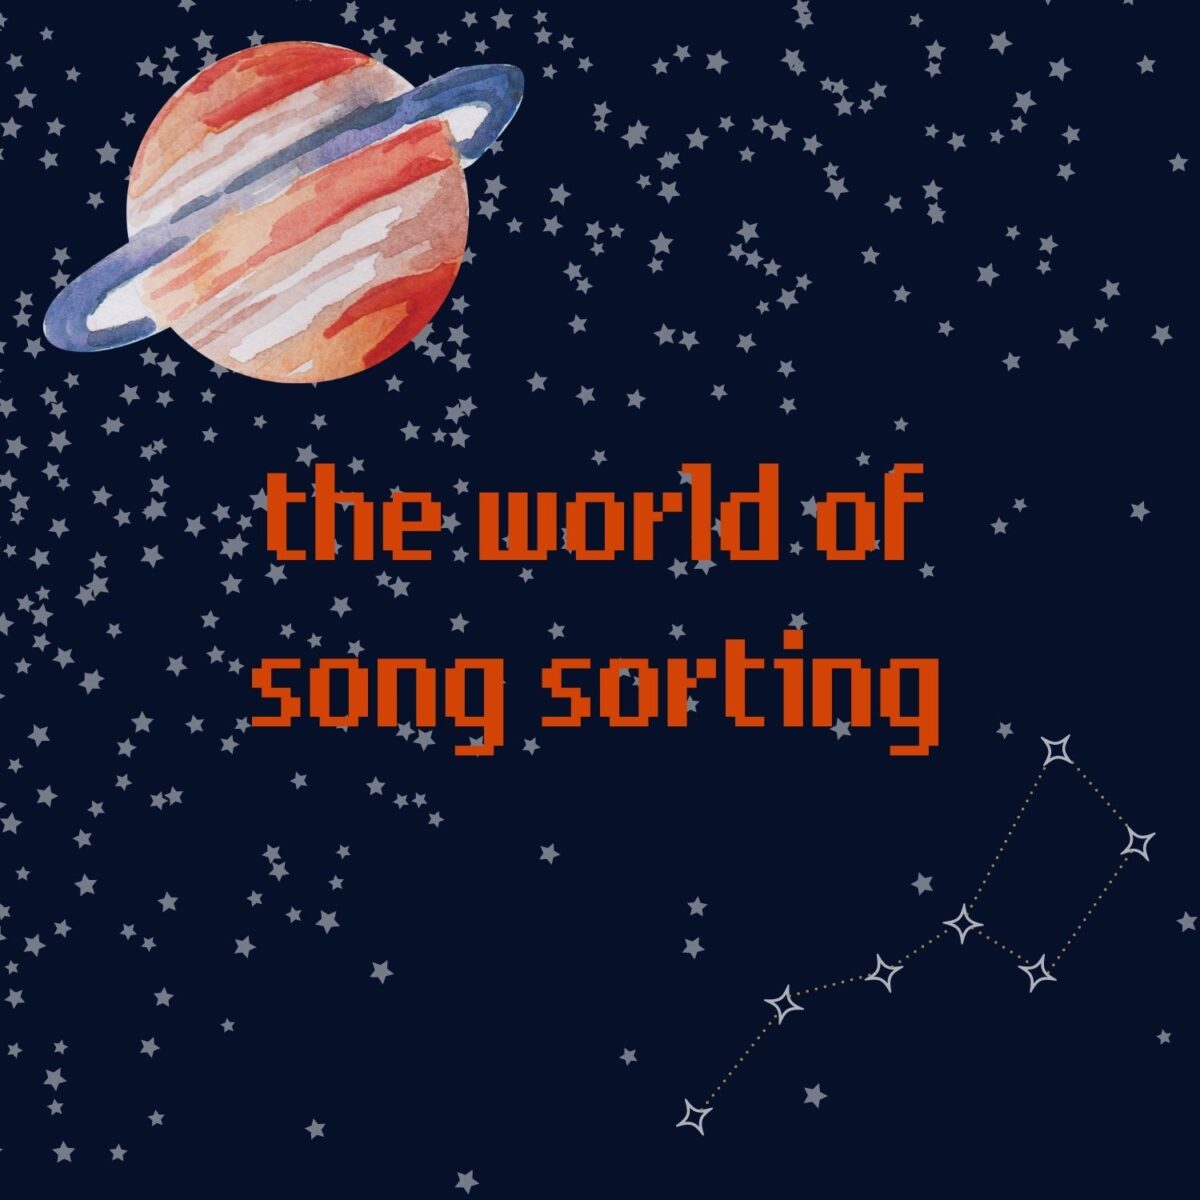 A dark blue background with tiny faded white stars overlaid atop. The little dipper constellation is in the bottom right corner. In the upper left hand corner, there is a watercolor blue and reddish orange planet with rings around it. In the center of the image there is pixelated text that reads “the world of song sorting” in all lowercase. That text is the same reddish orange as the planet in the upper left hand corner.